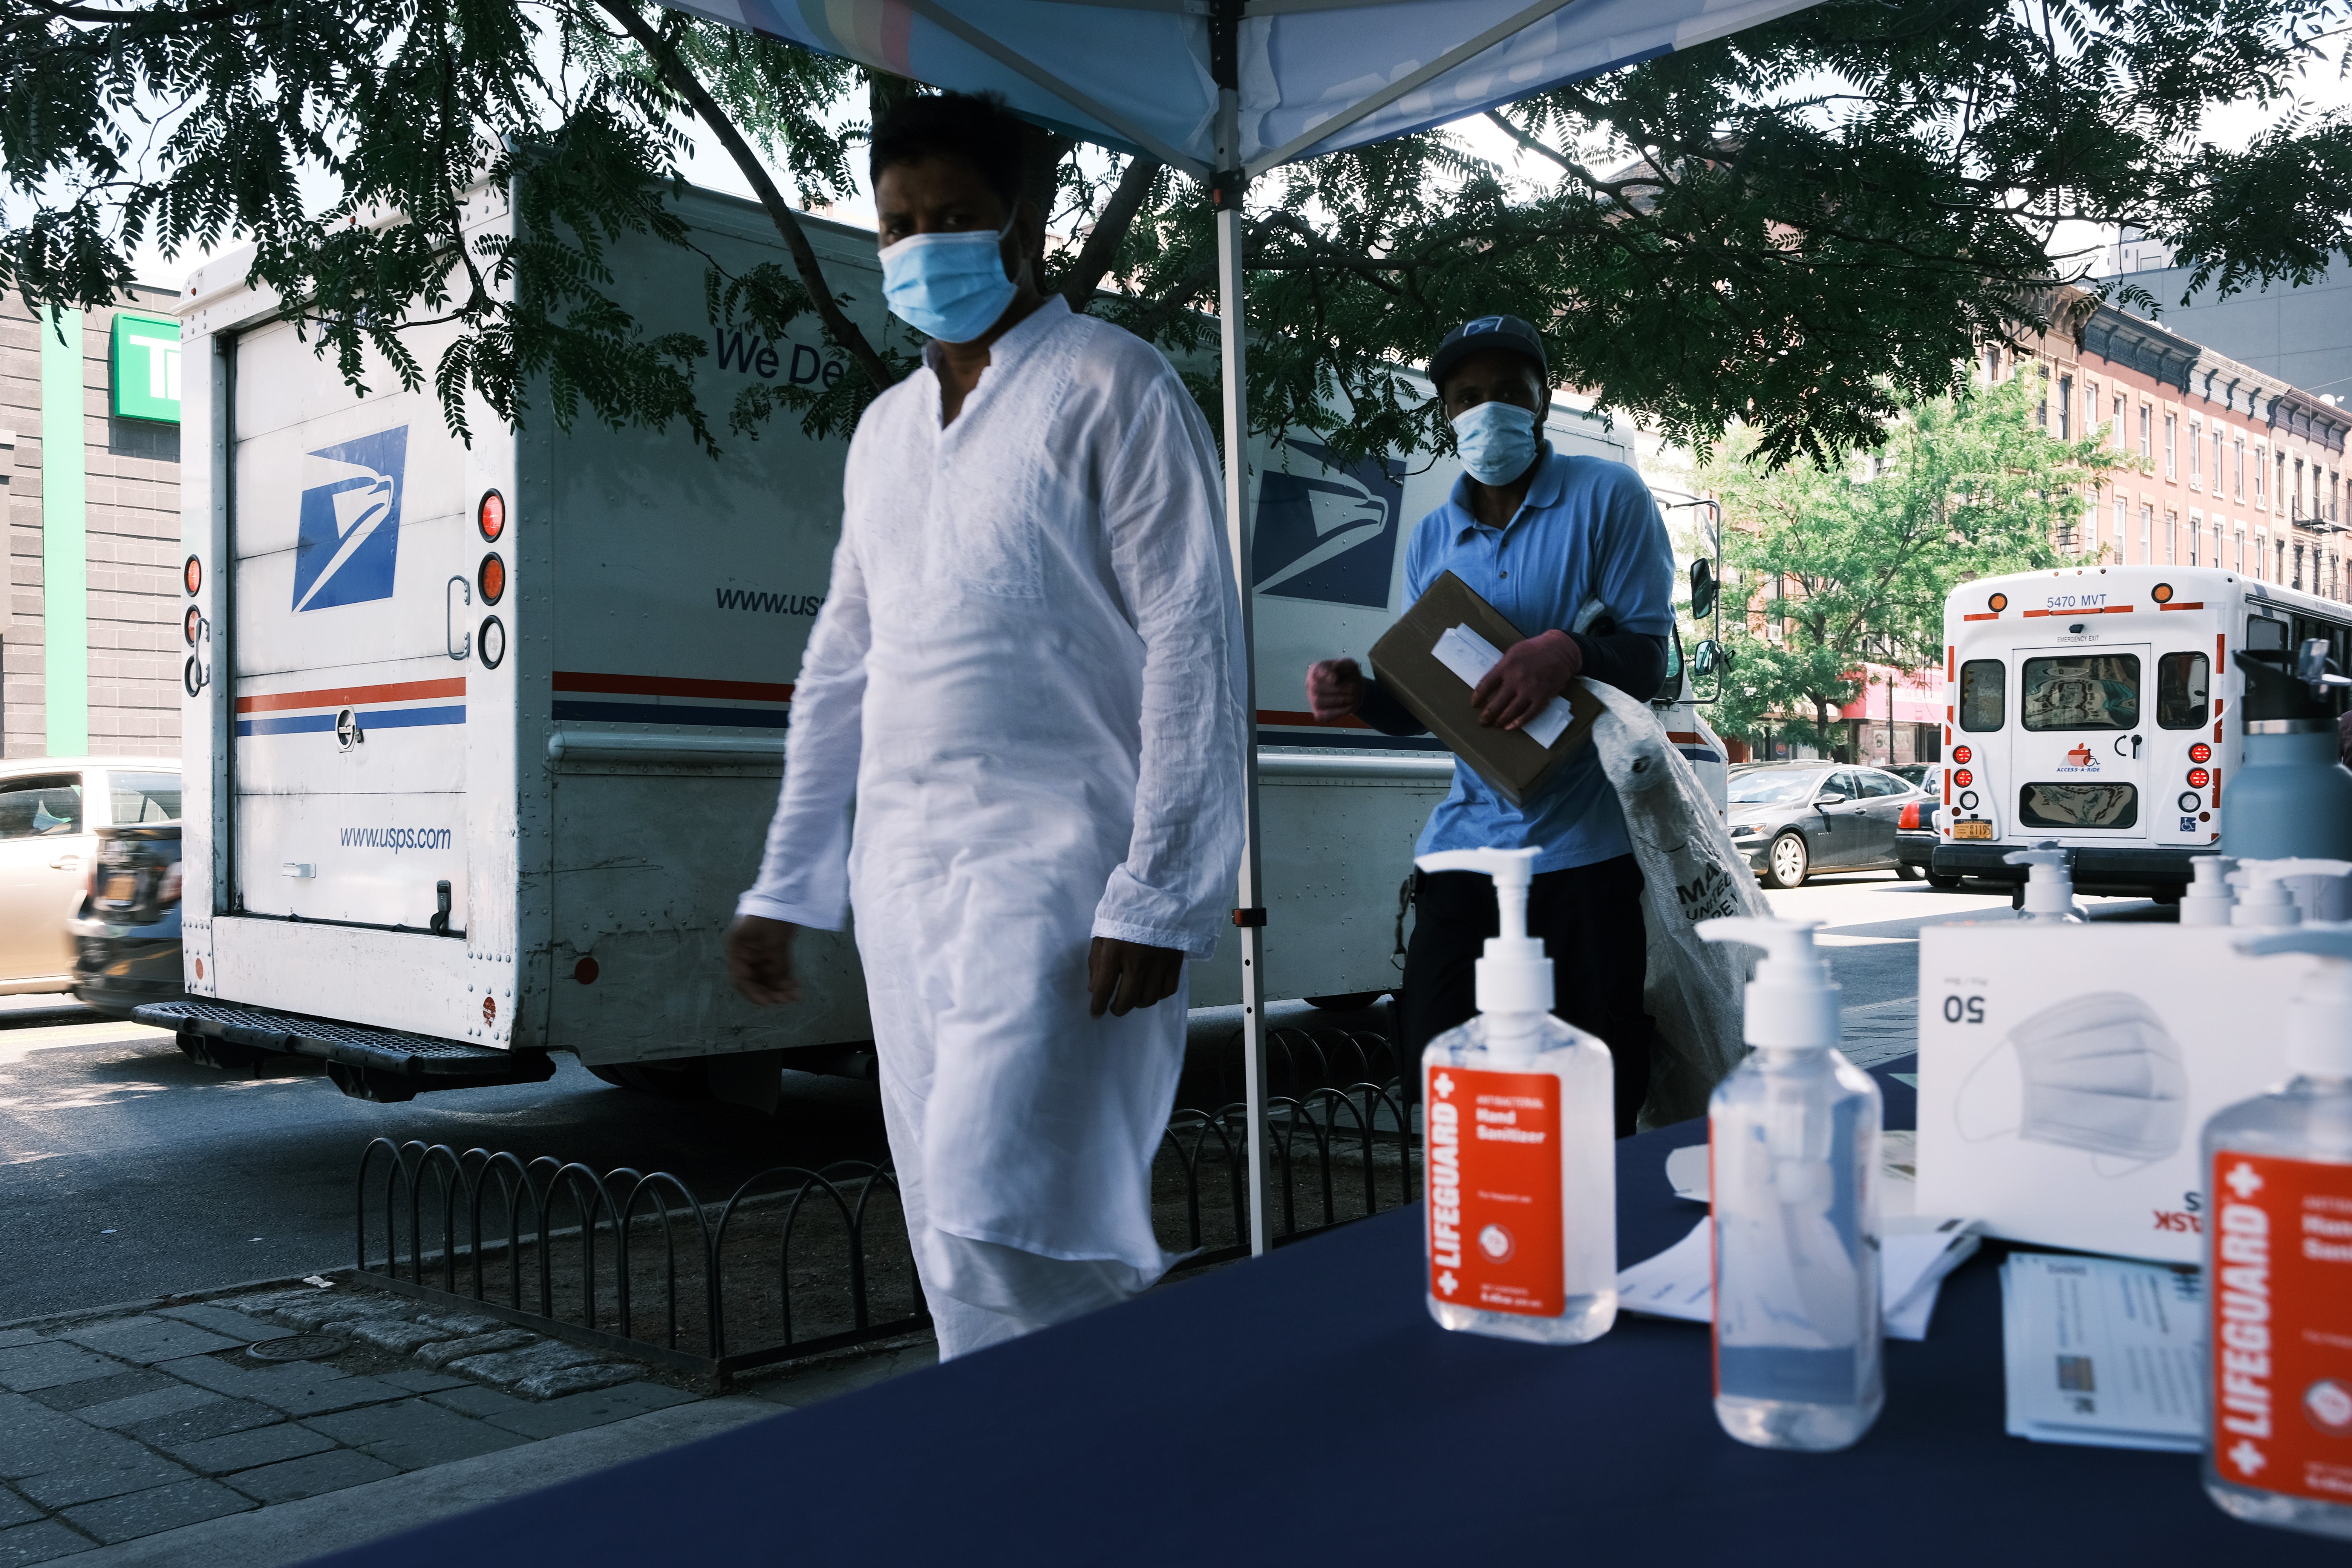 File image: A city-operated mobile pharmacy advertises the Covid-19 vaccine in a Brooklyn neighbourhood on 30 July 2021 in New York City